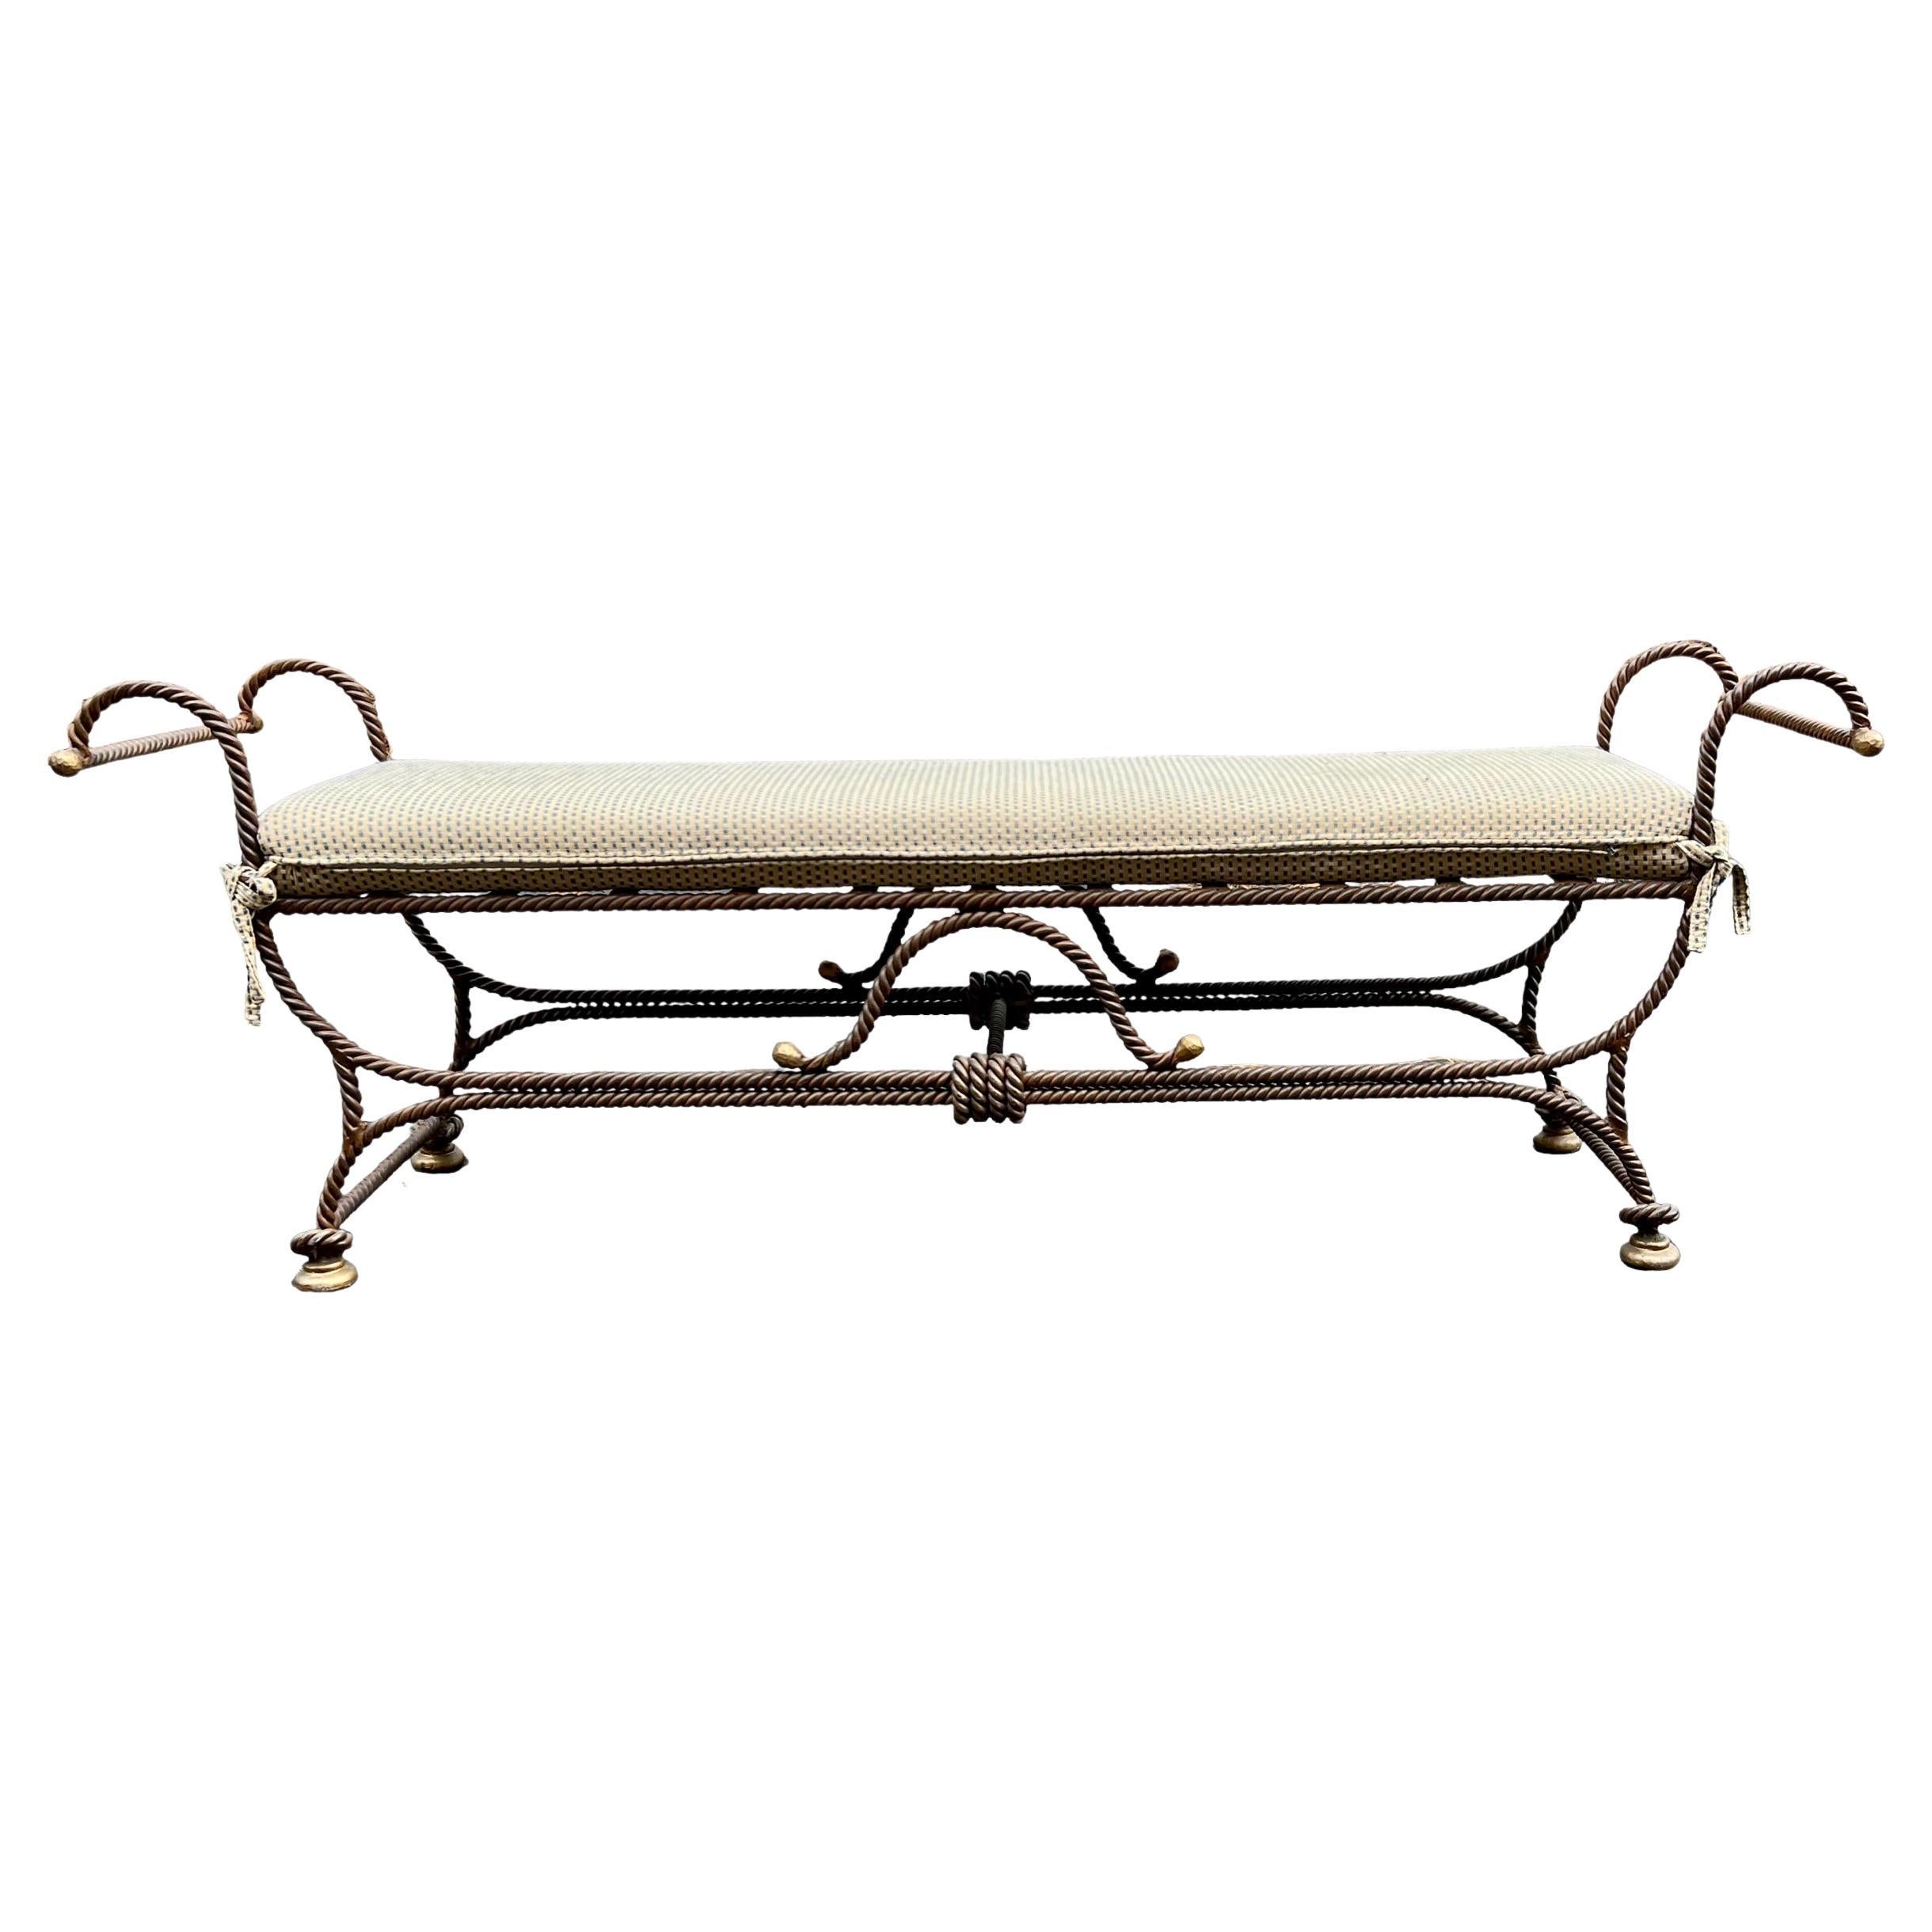 This is a Hollywood Regency Era wrought Iron Neo-Classical style bench with rope and tassel motif. The piece is very heavy, and the Swiss dot cotton fabric cushion is vintage. The iron does have gilt accents. It is in very good condition and most